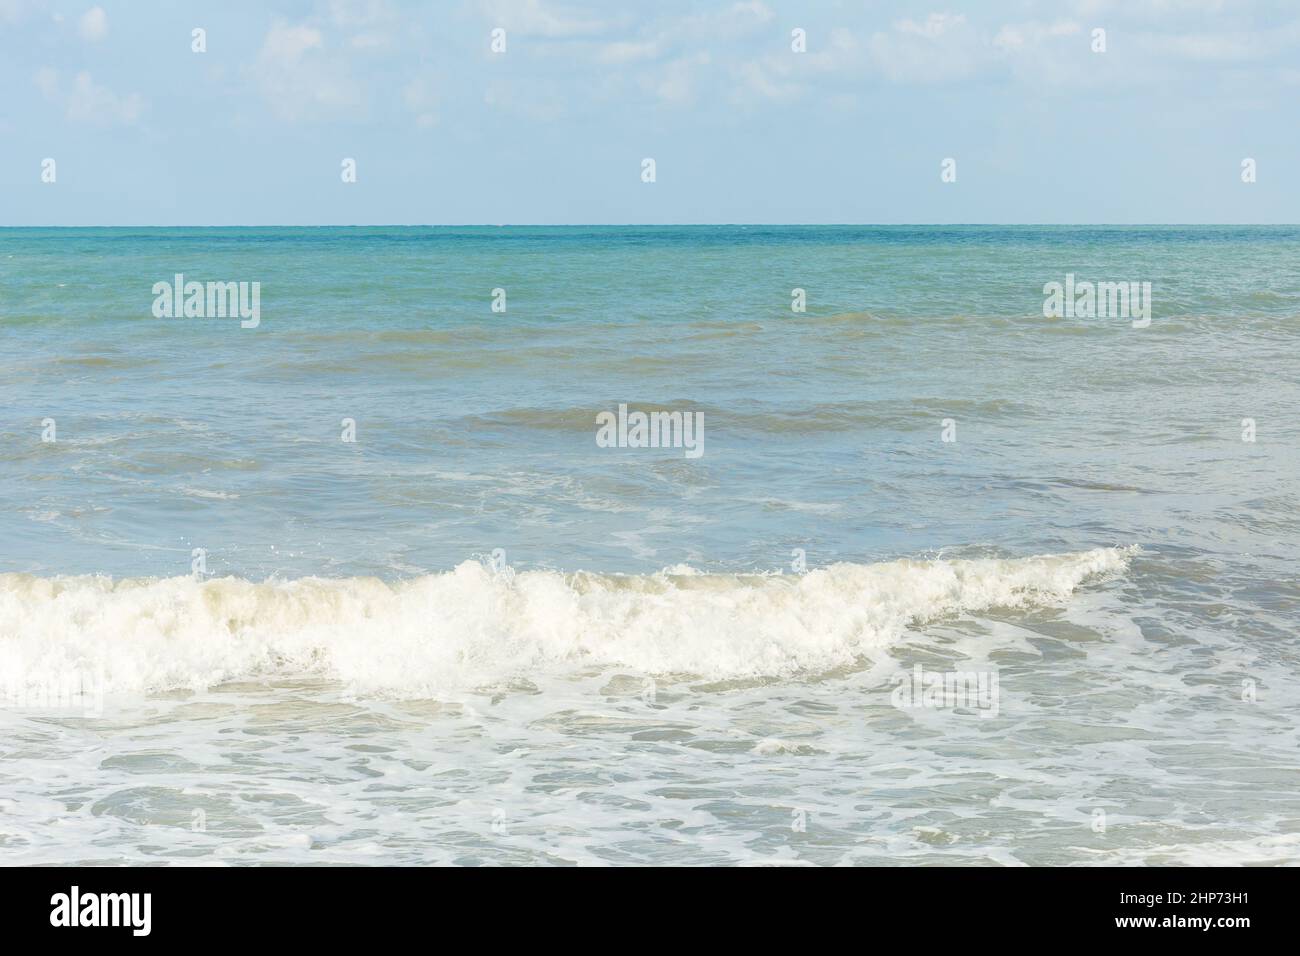 Sea with waves, storm from the wind. Summer mood. Stock Photo